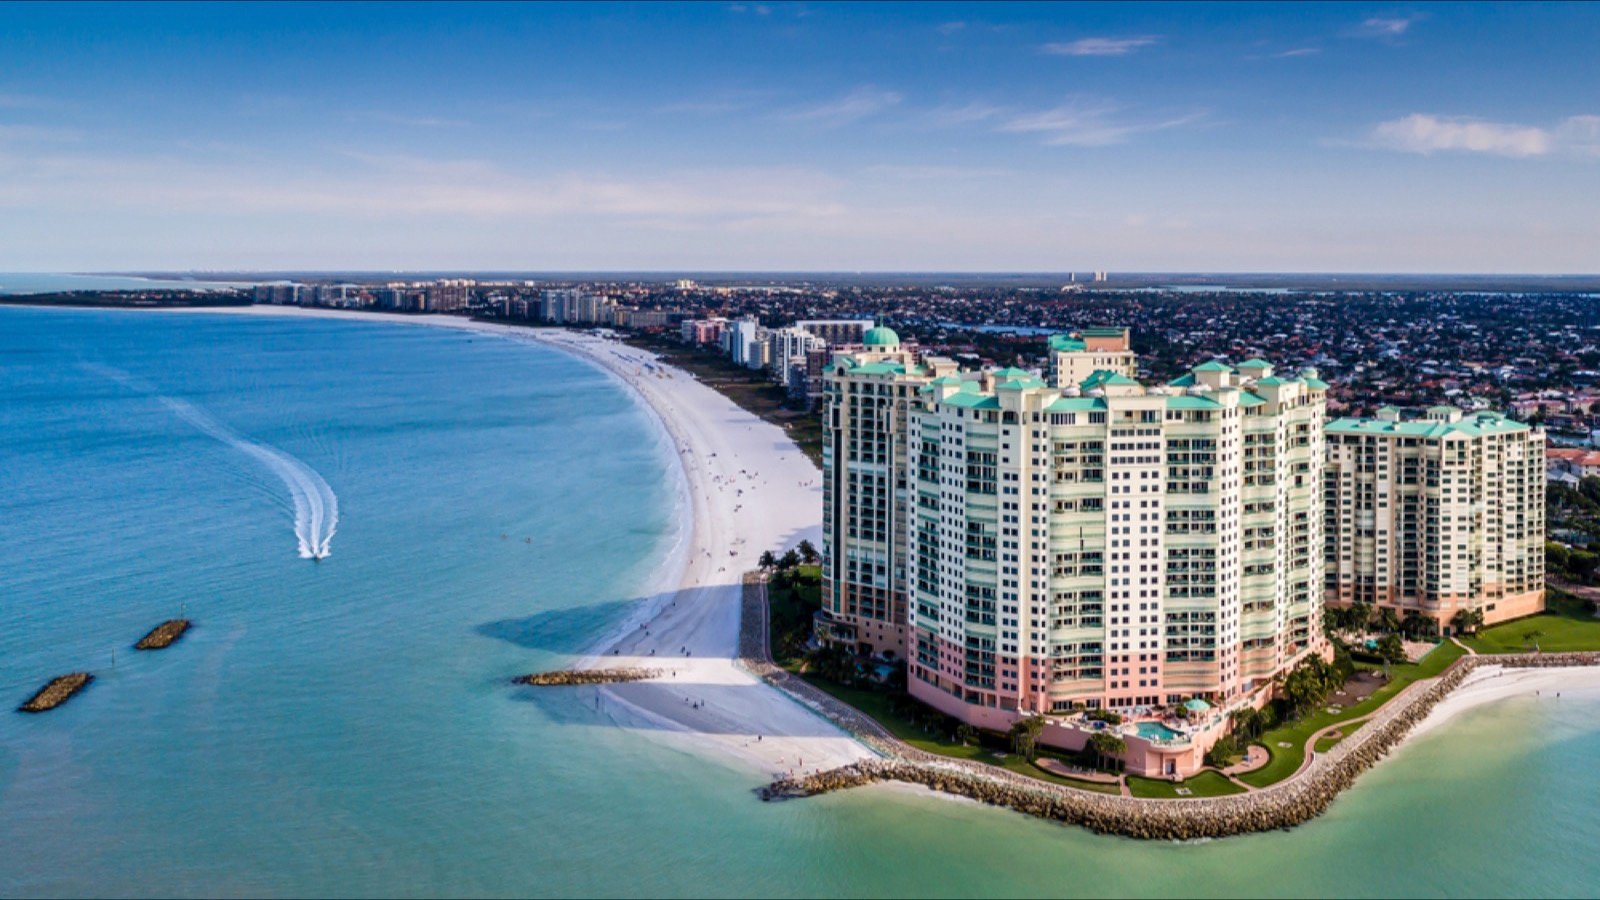 <p>Just off the state’s southern coast is Marco Island, a great spot to see wild dolphins and manatees swimming in the water. Pack a picnic, go window shopping, or enjoy water activities like kayaking and swimming.</p>